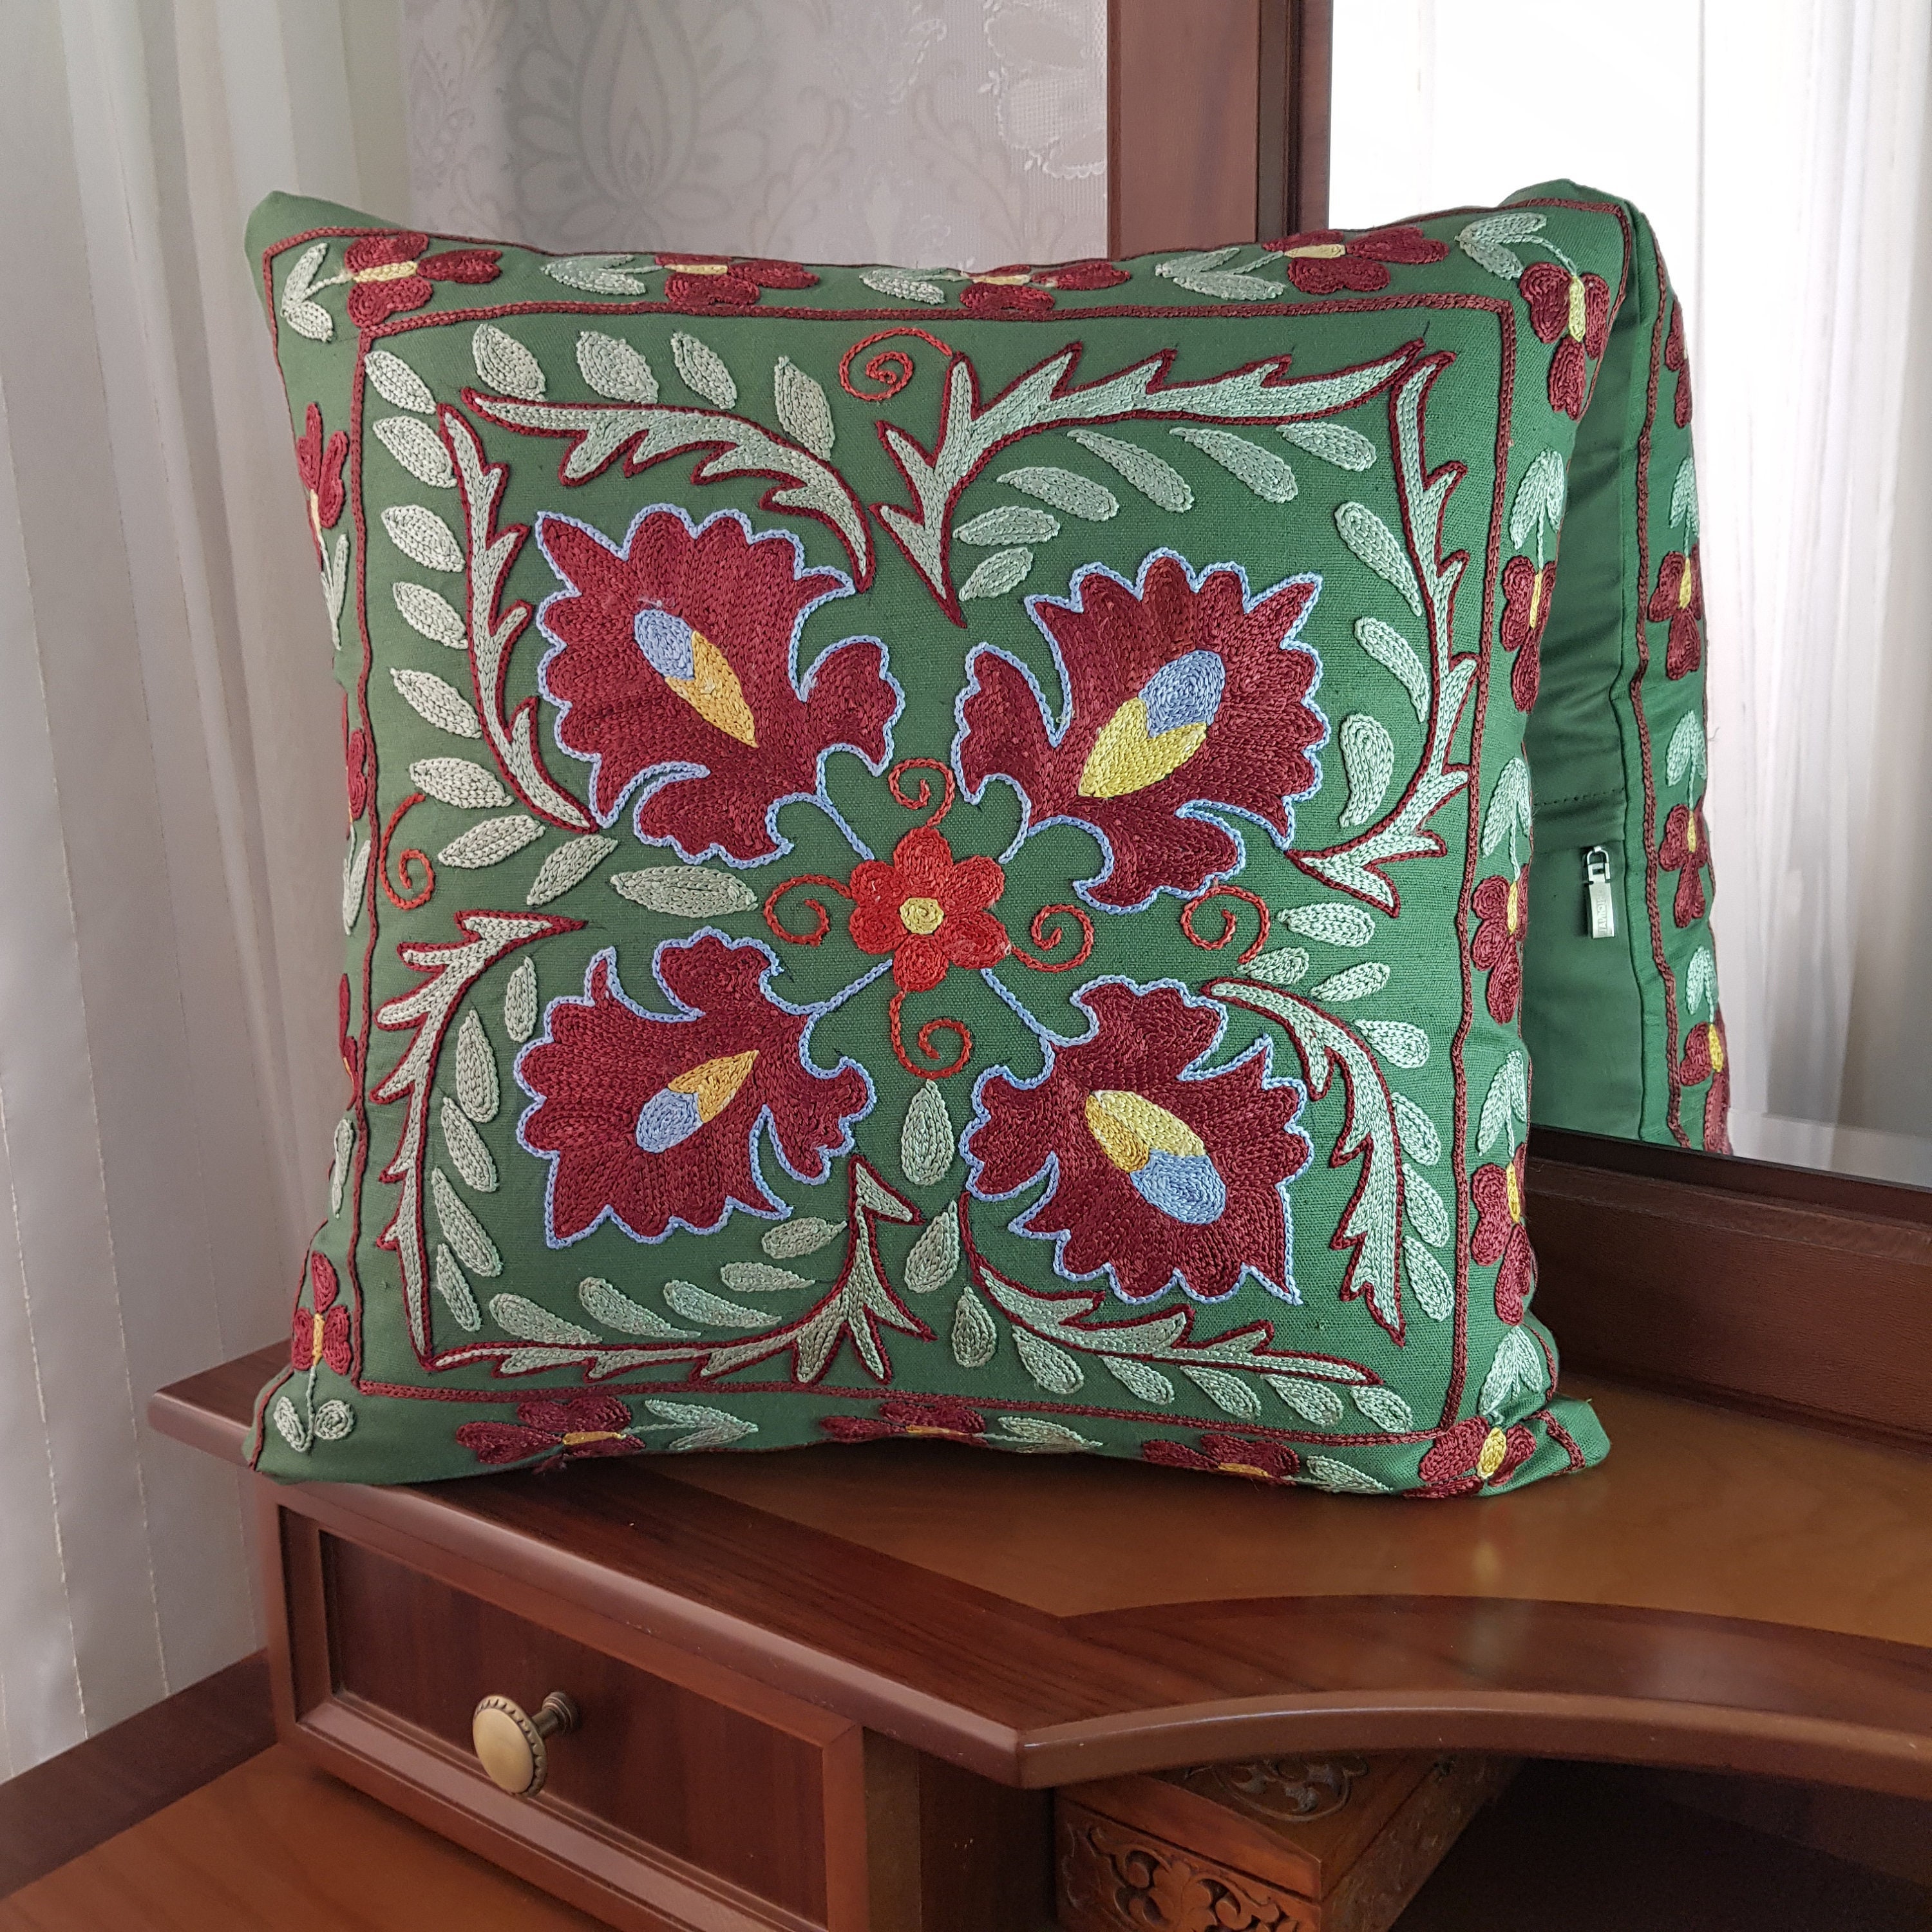 The ultimate guide to buying lumbar pillow covers - Uzbek Alive